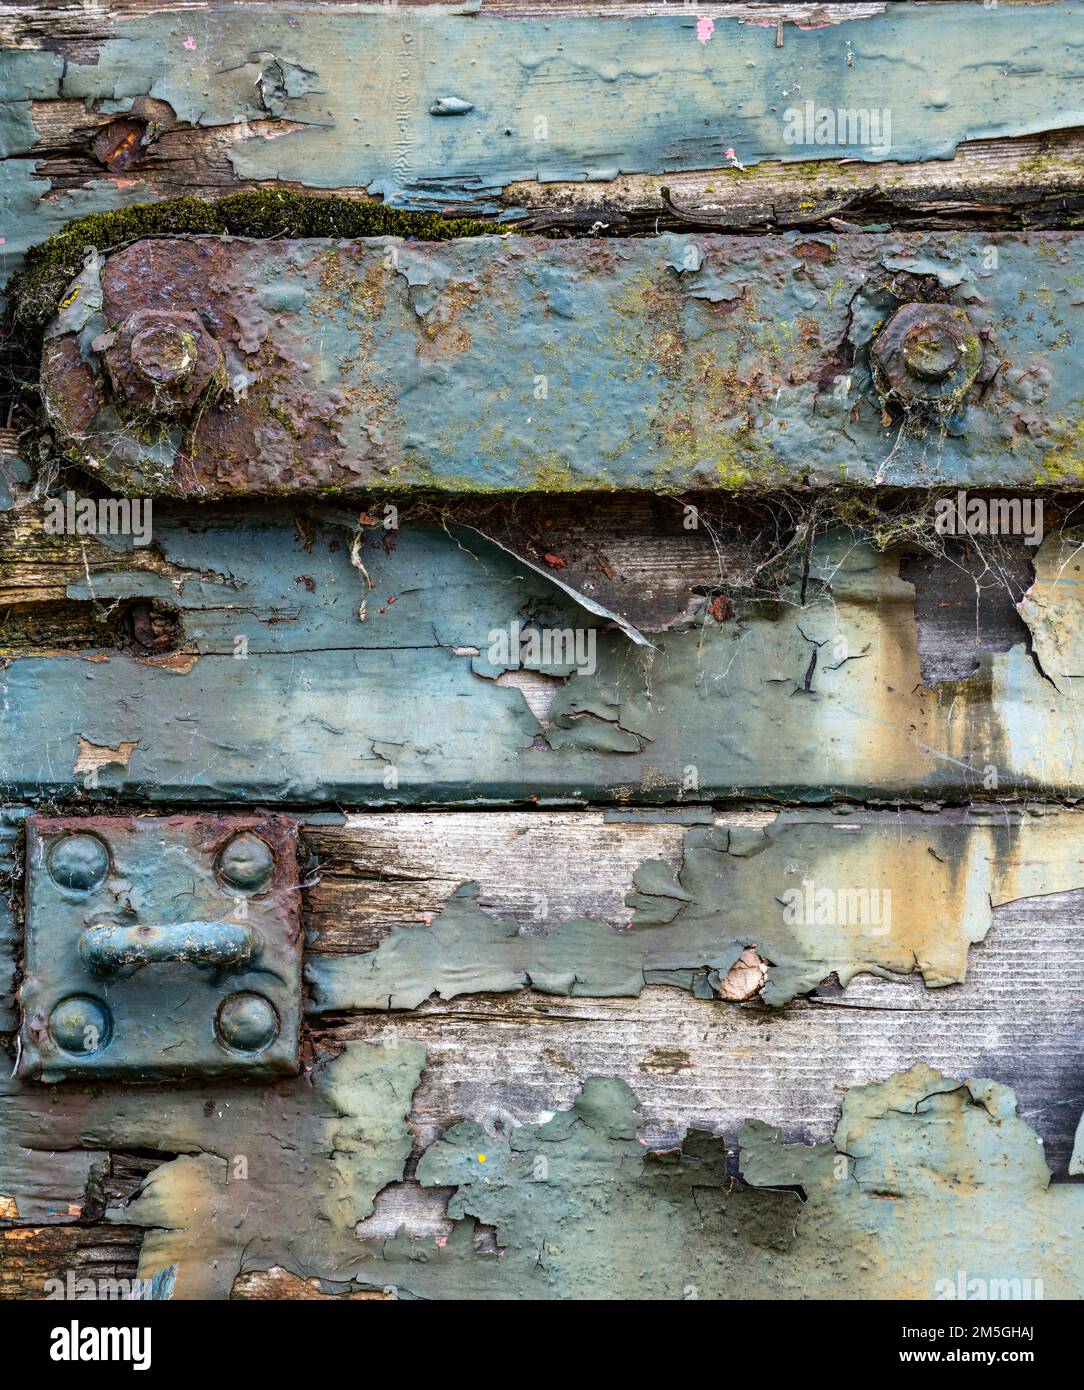 Close up of a dilapidated vintage railway goods wagon Stock Photo